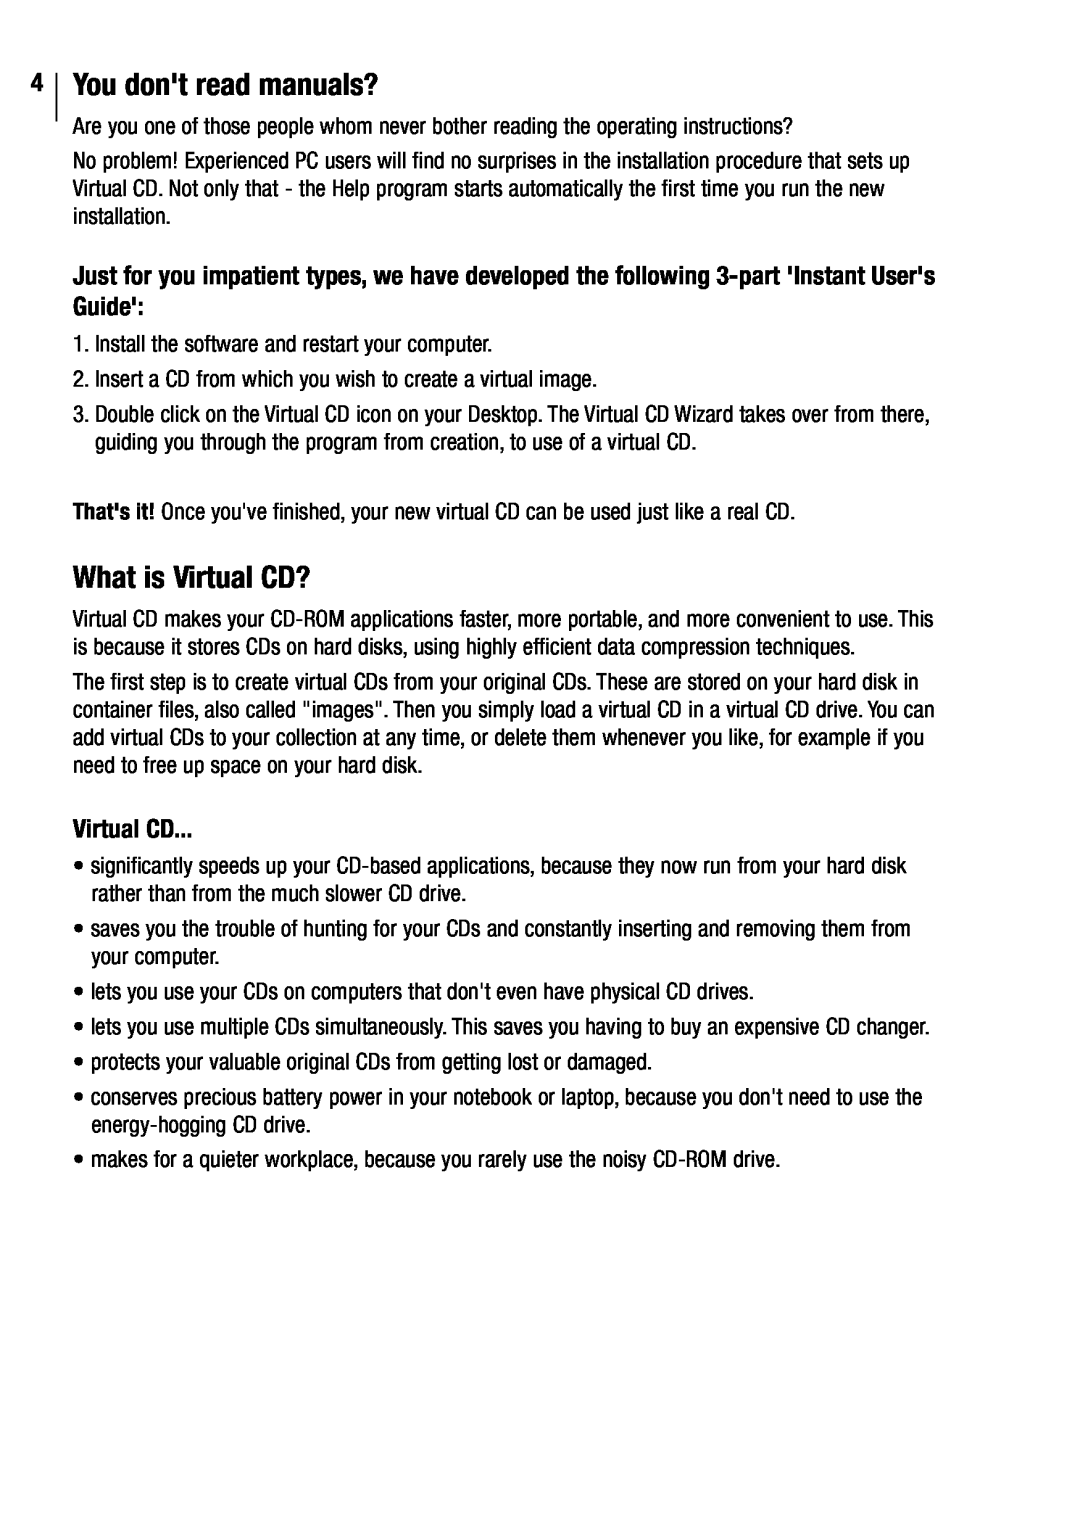 Microtest VIRTUAL CD v3 You dont read manuals?, What is Virtual CD? 